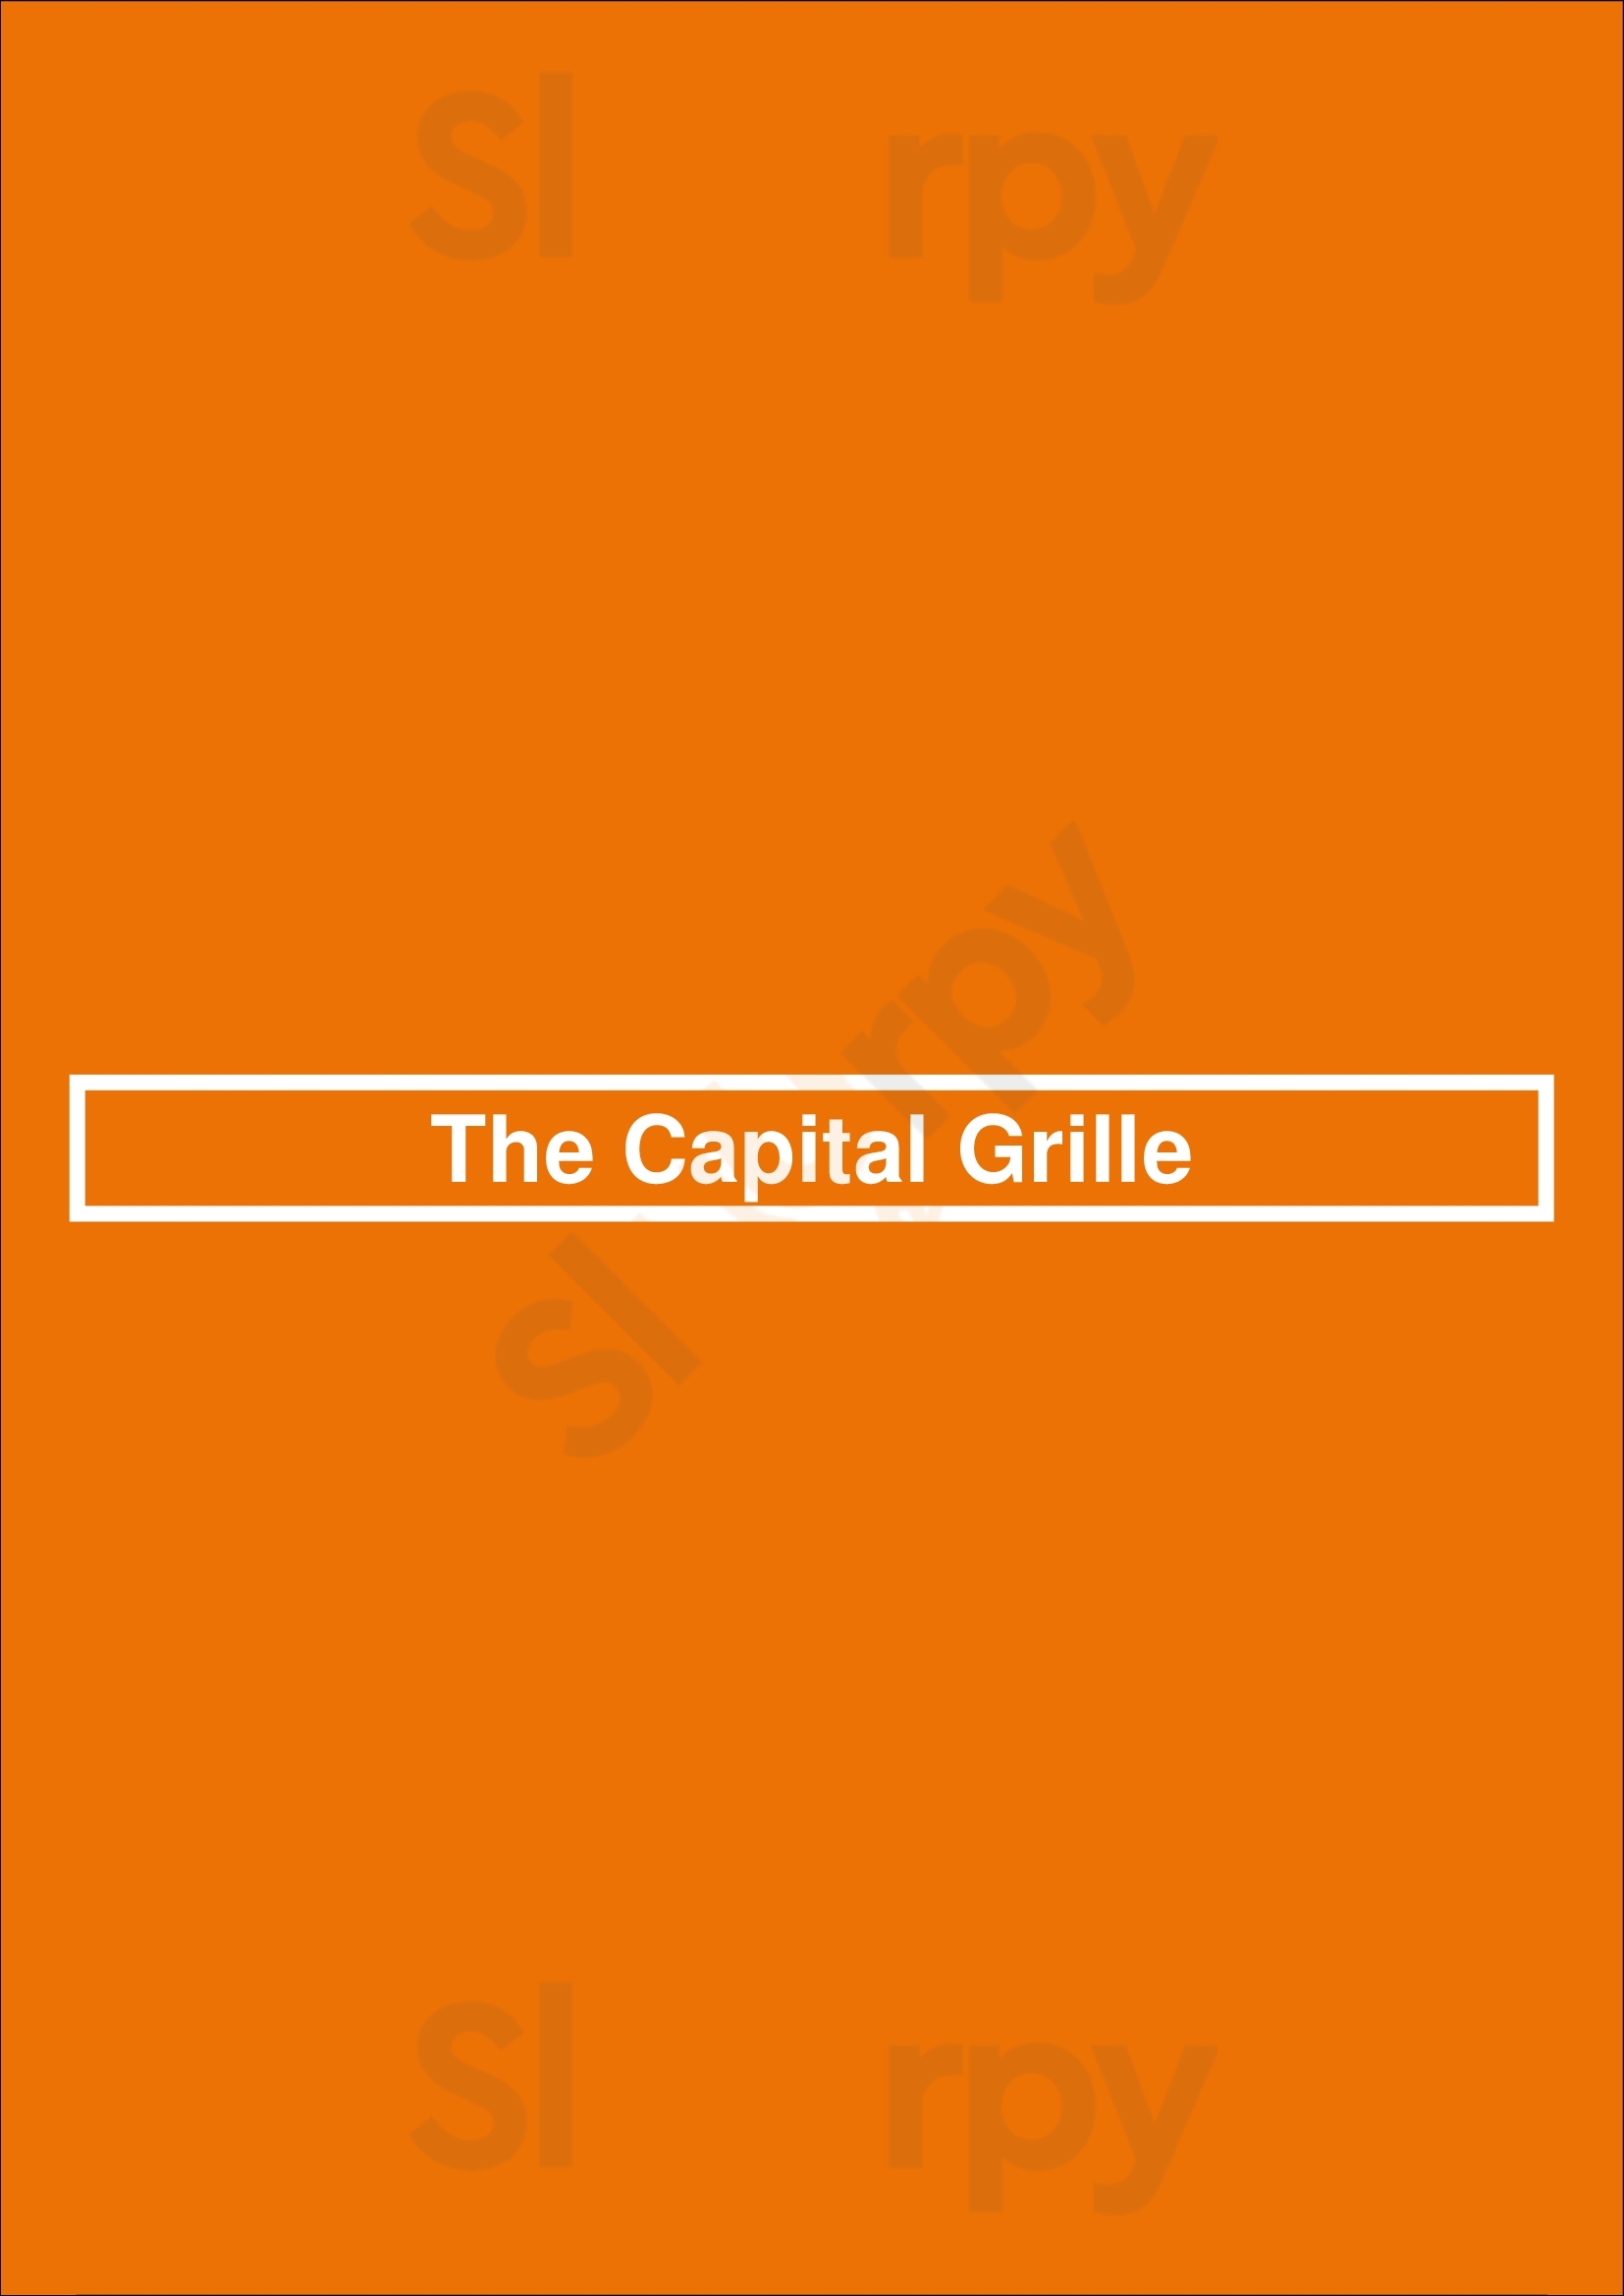 The Capital Grille Pittsburgh Menu - 1